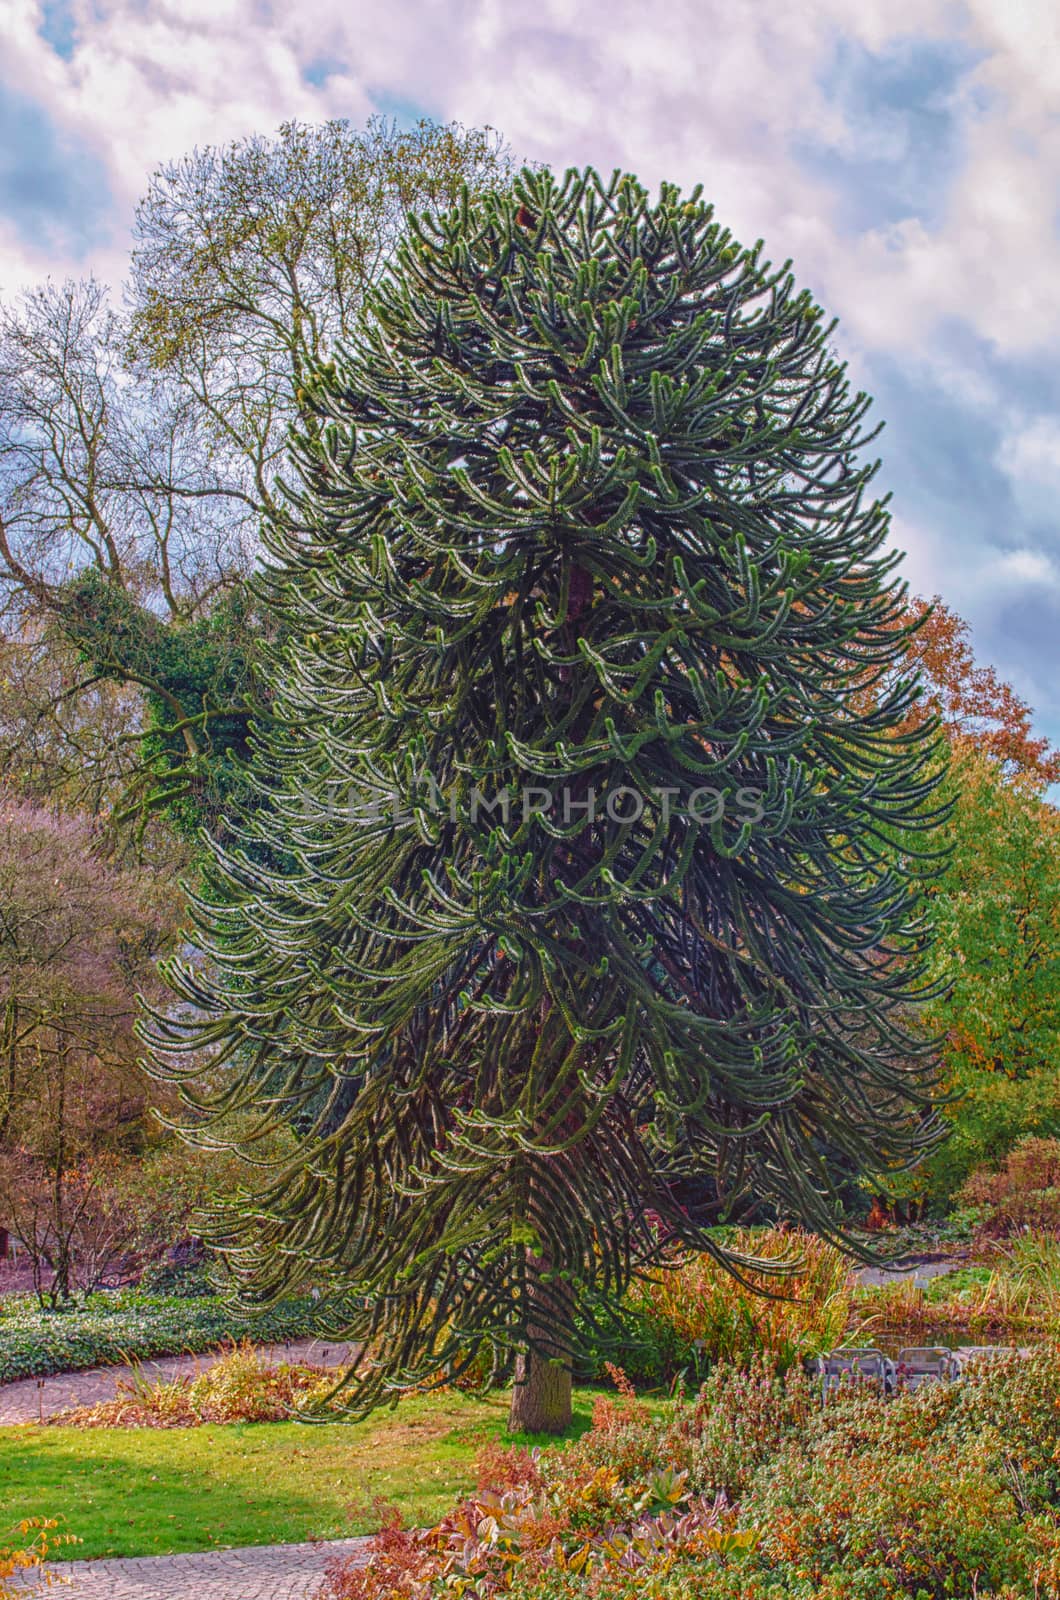 Araucaria grow evergreen trees and belong to the plant family of the conifers.